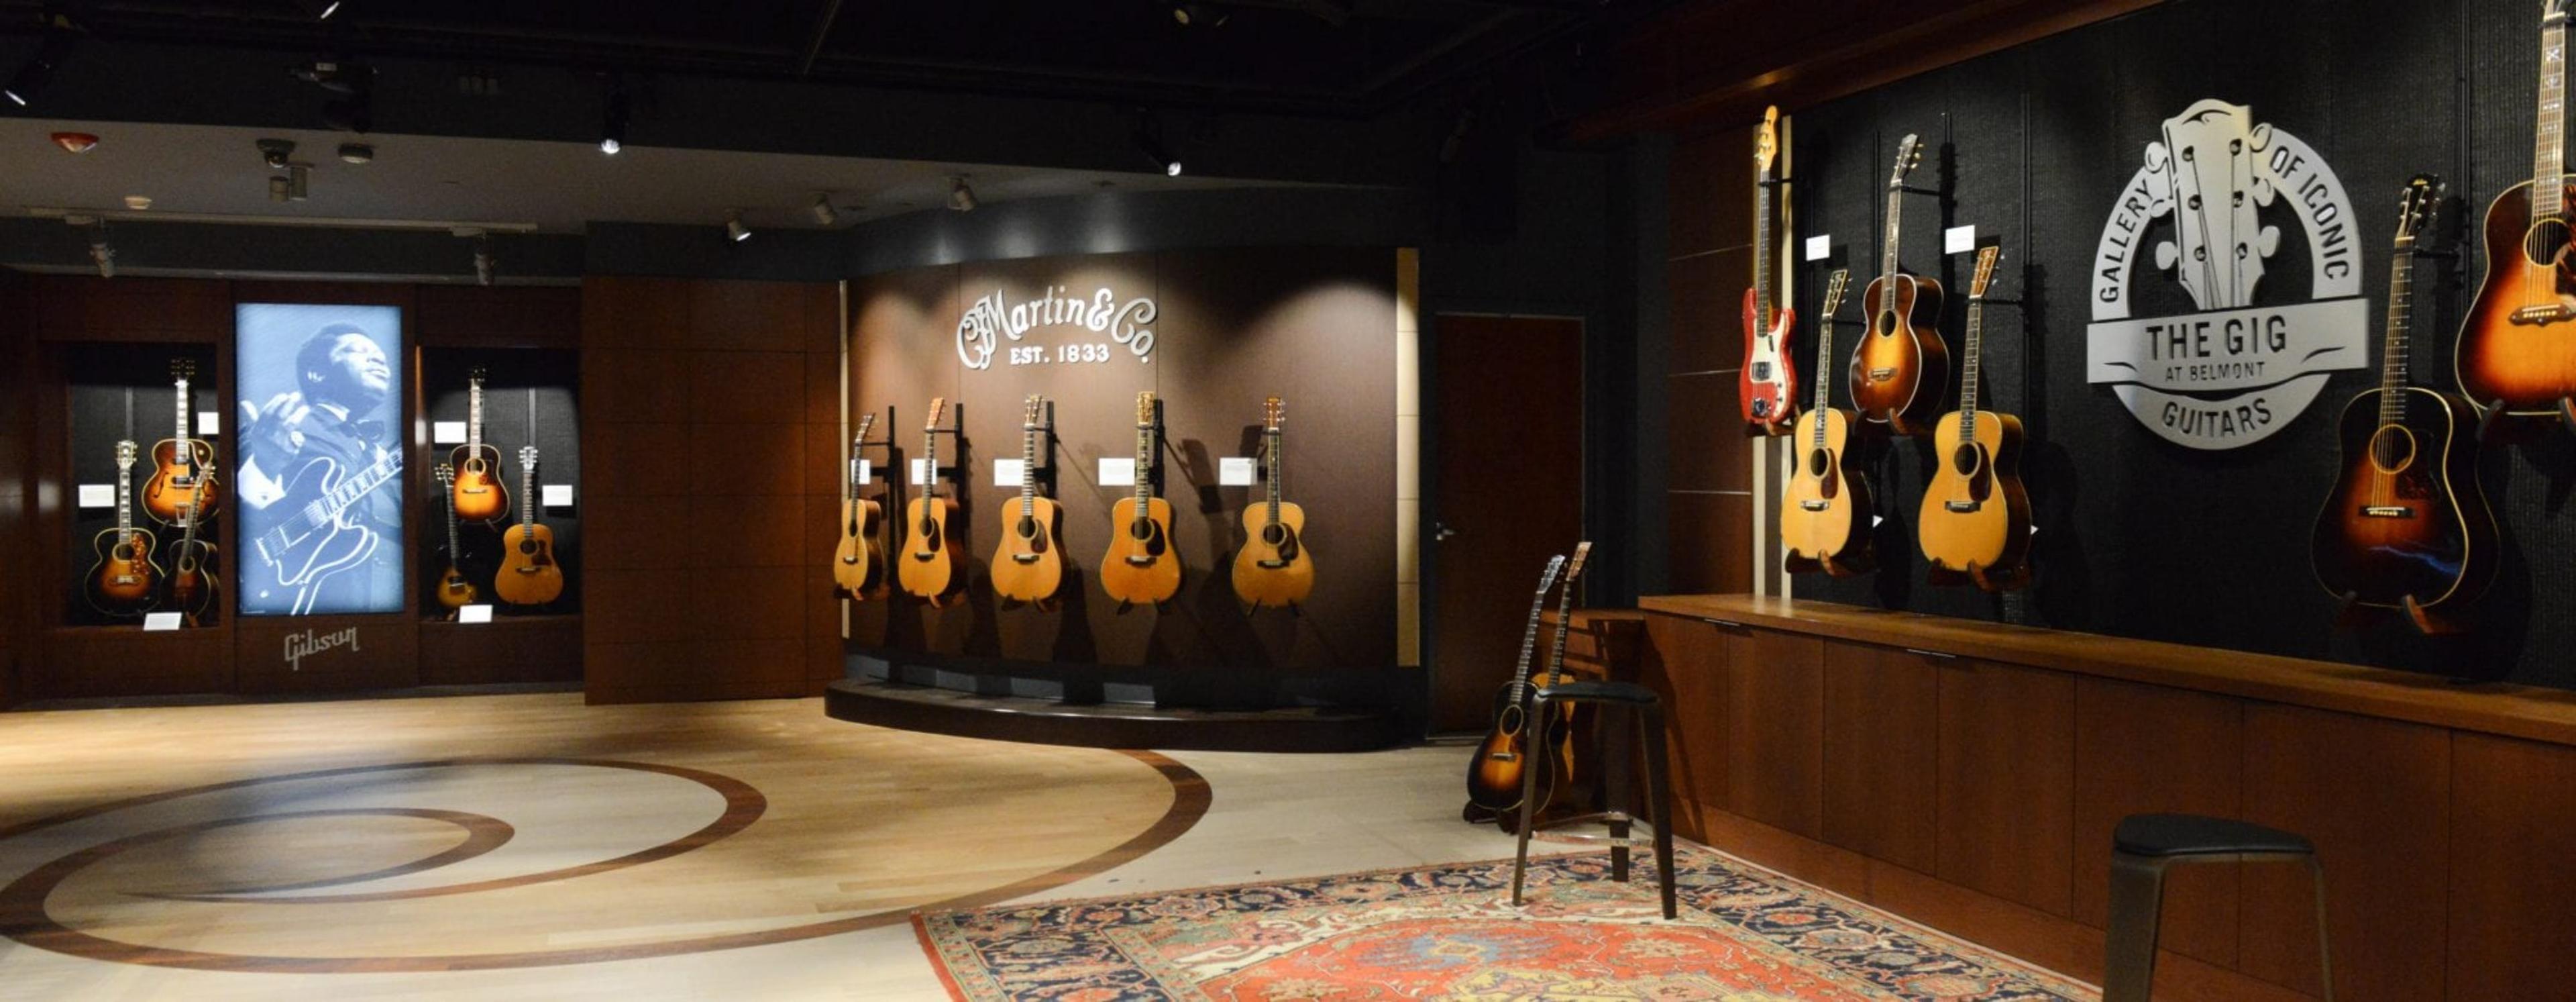 The Gallery of Iconic Guitars (The GIG) at Belmont